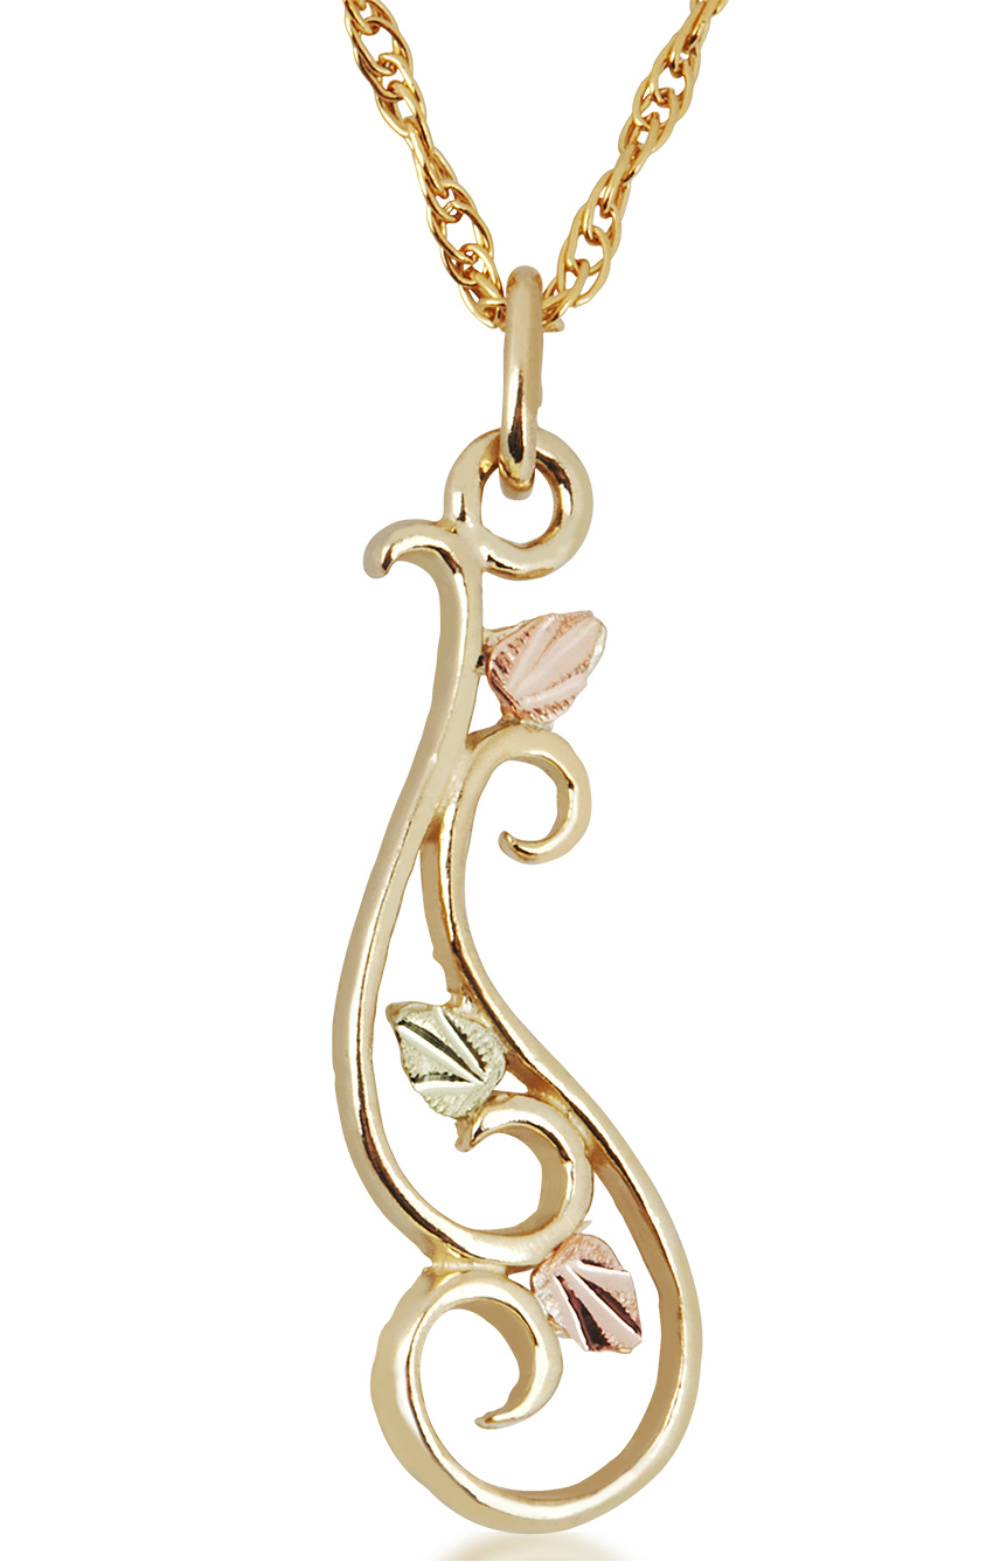 Scrollwork Dangle Pendant Necklace, 10k Yellow Gold